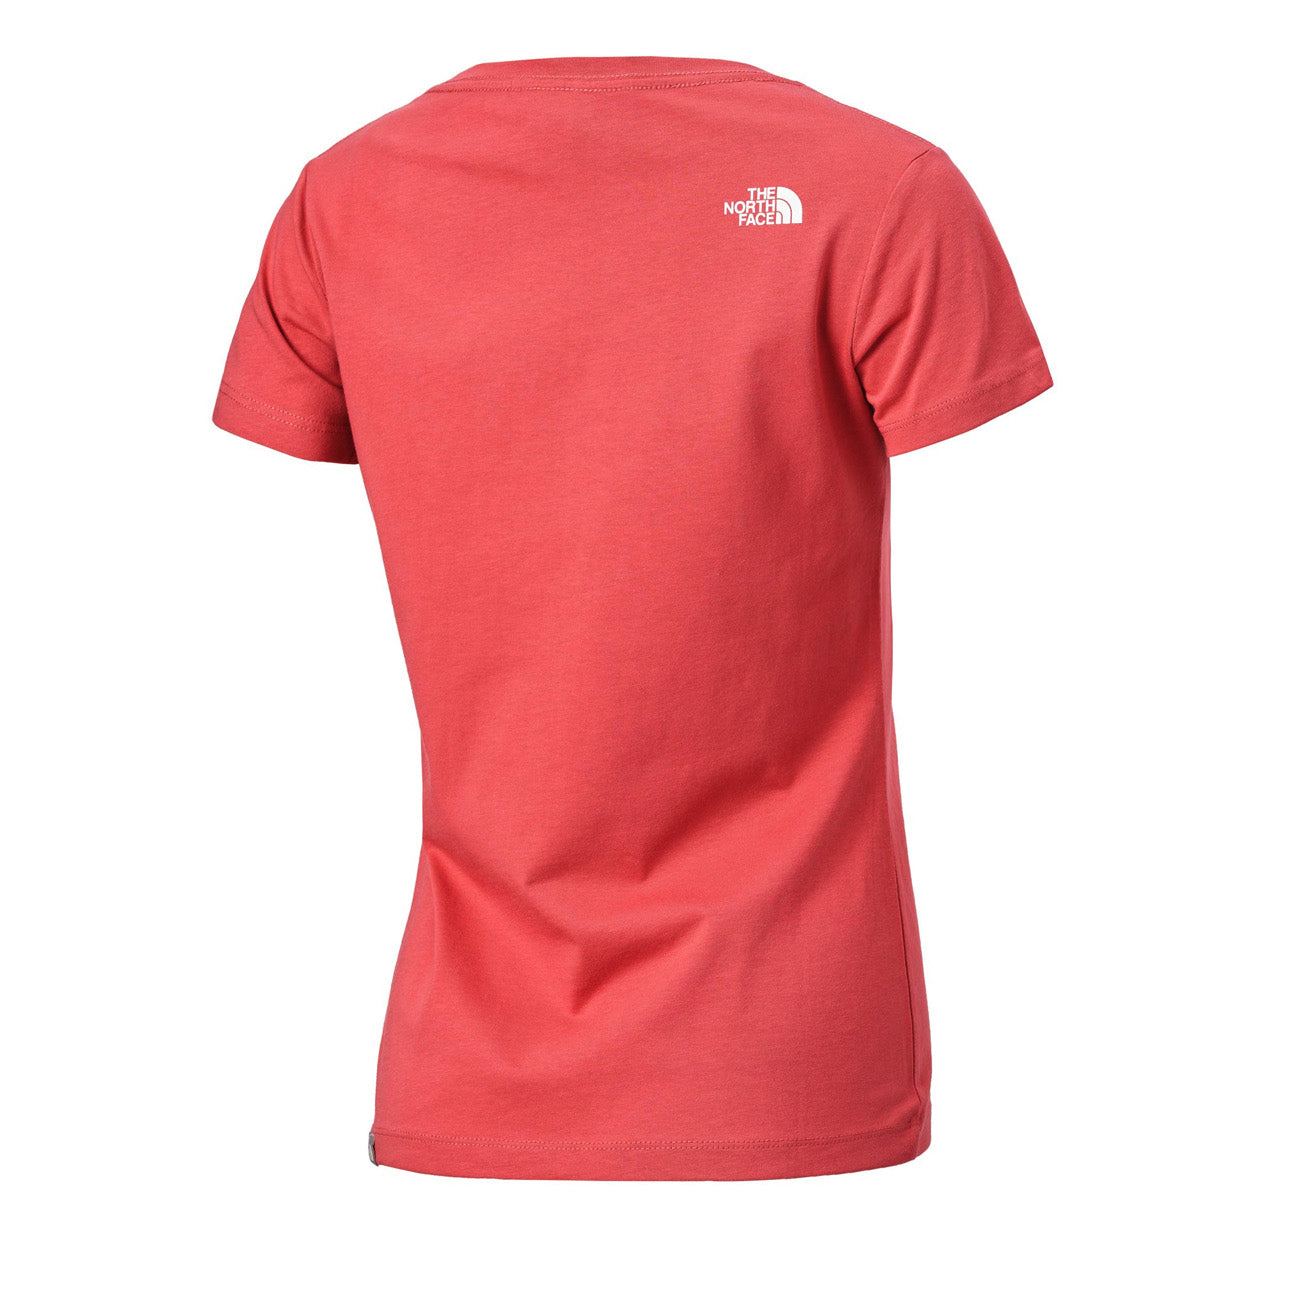 The North Face W S/S Never Stop Exploring Tee Damen Slate Rose